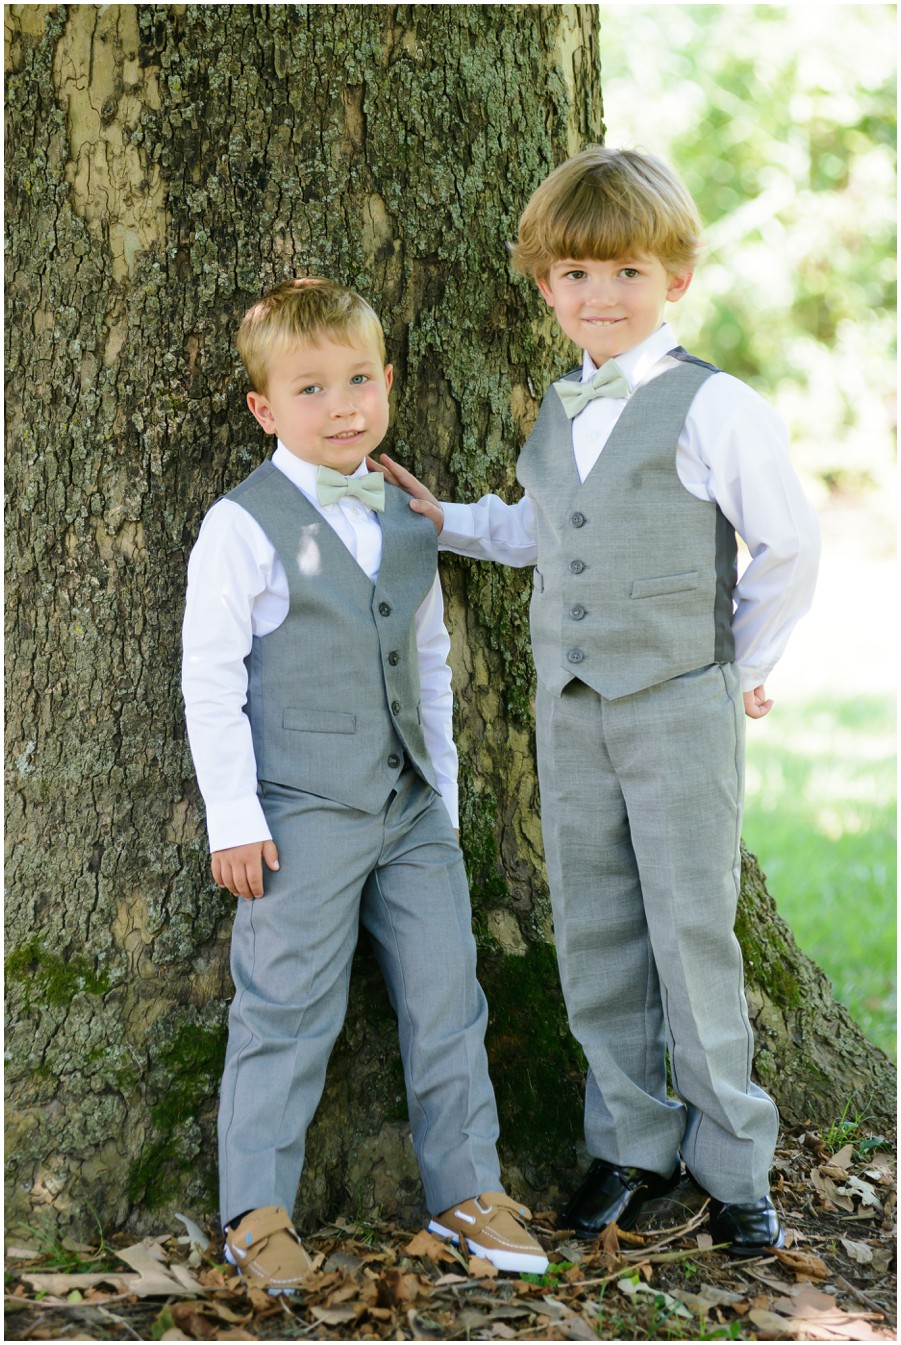 Little ring bearers in grey suits at a wedding at The Oaks by Melissa Grimes-Guy Photography